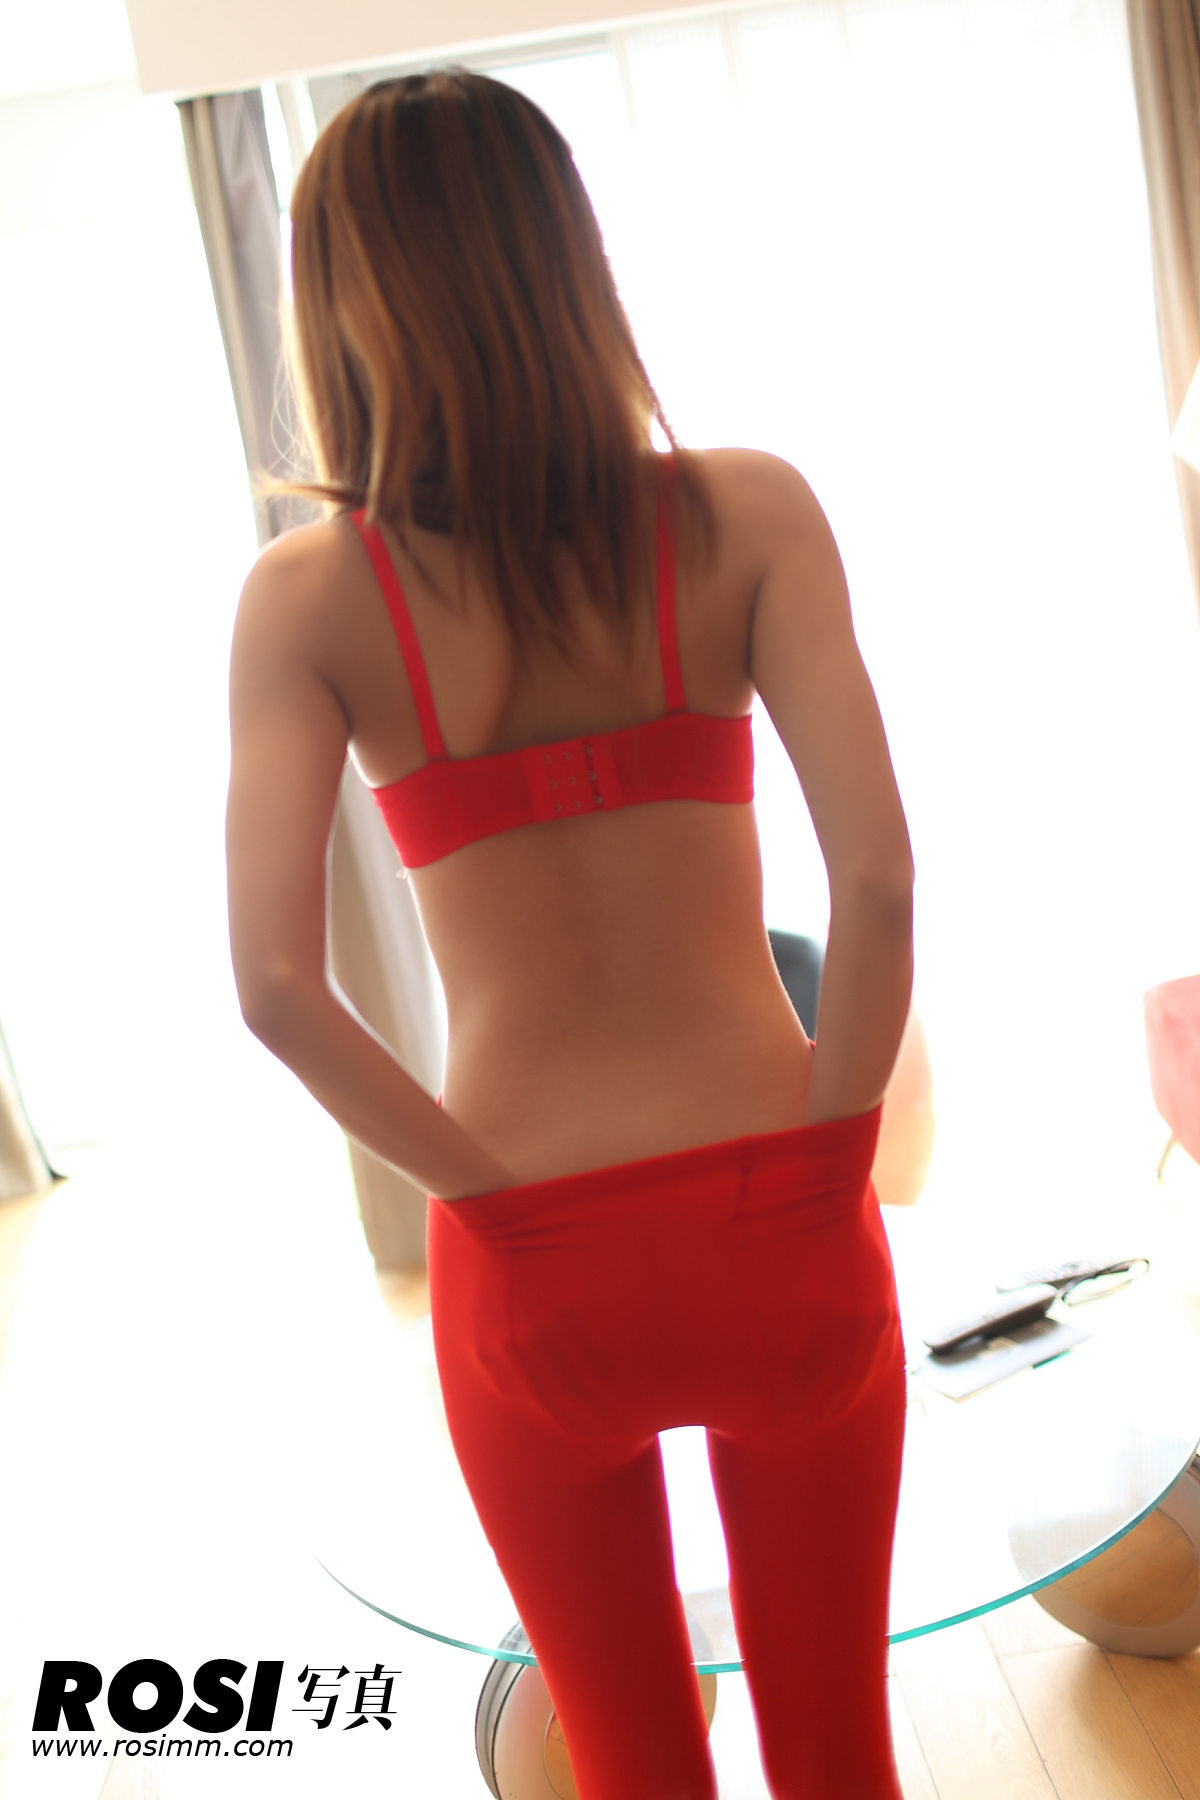 [ROSI] No.190 anonymous photo red clothes red stockings bold super temptation